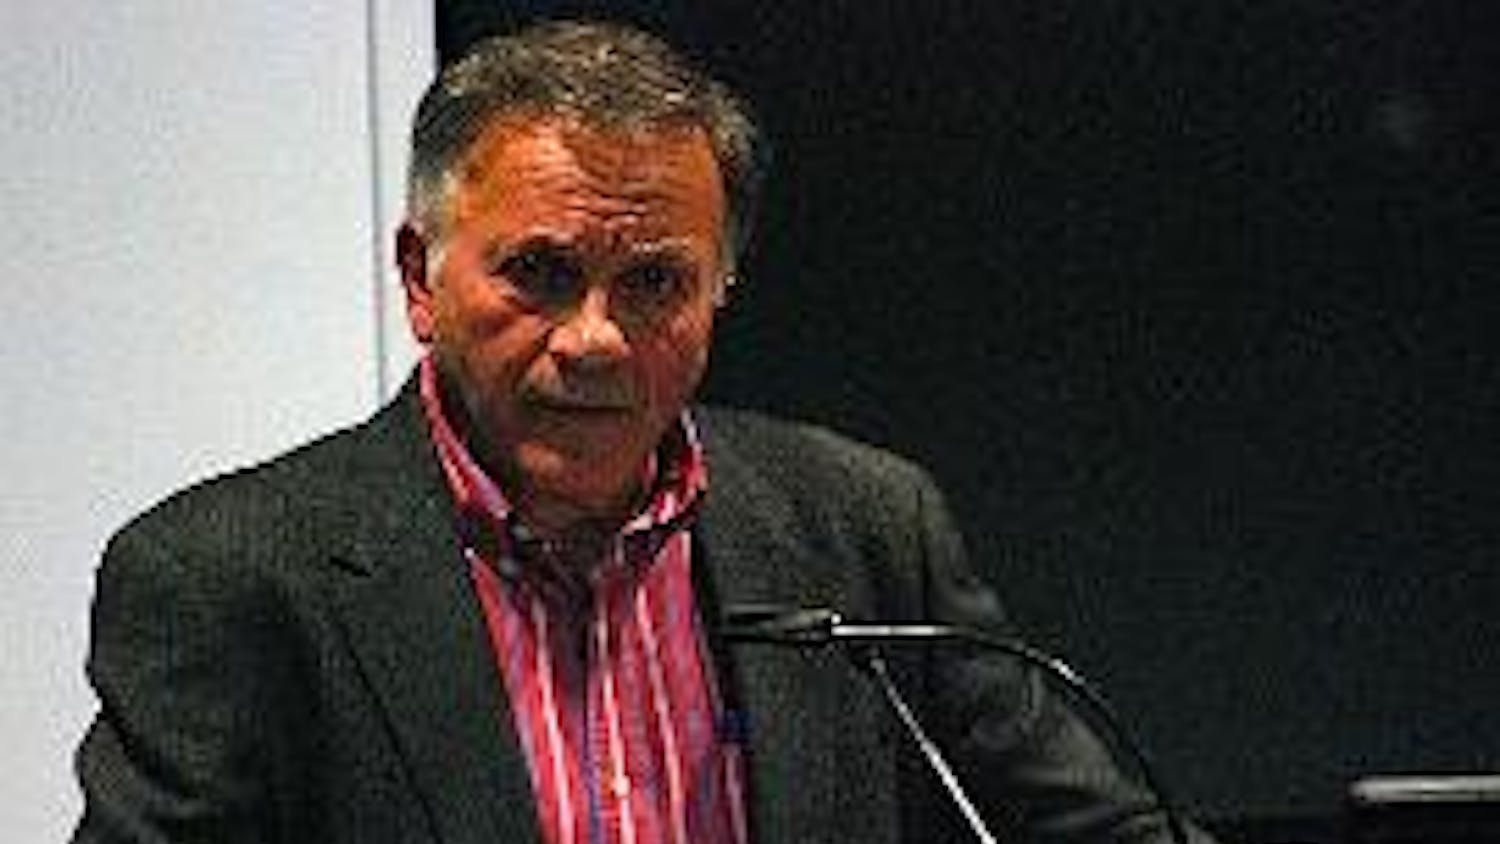 GOING GLOBAL? - Former Rep. Tom Tancredo, R-Colo., spoke to a packed room in Ward on Tuesday. While the Youth for Western Civilization club hosted the event, several other student organizations planned a "peaceful opposition" to his speech. Protesters wor